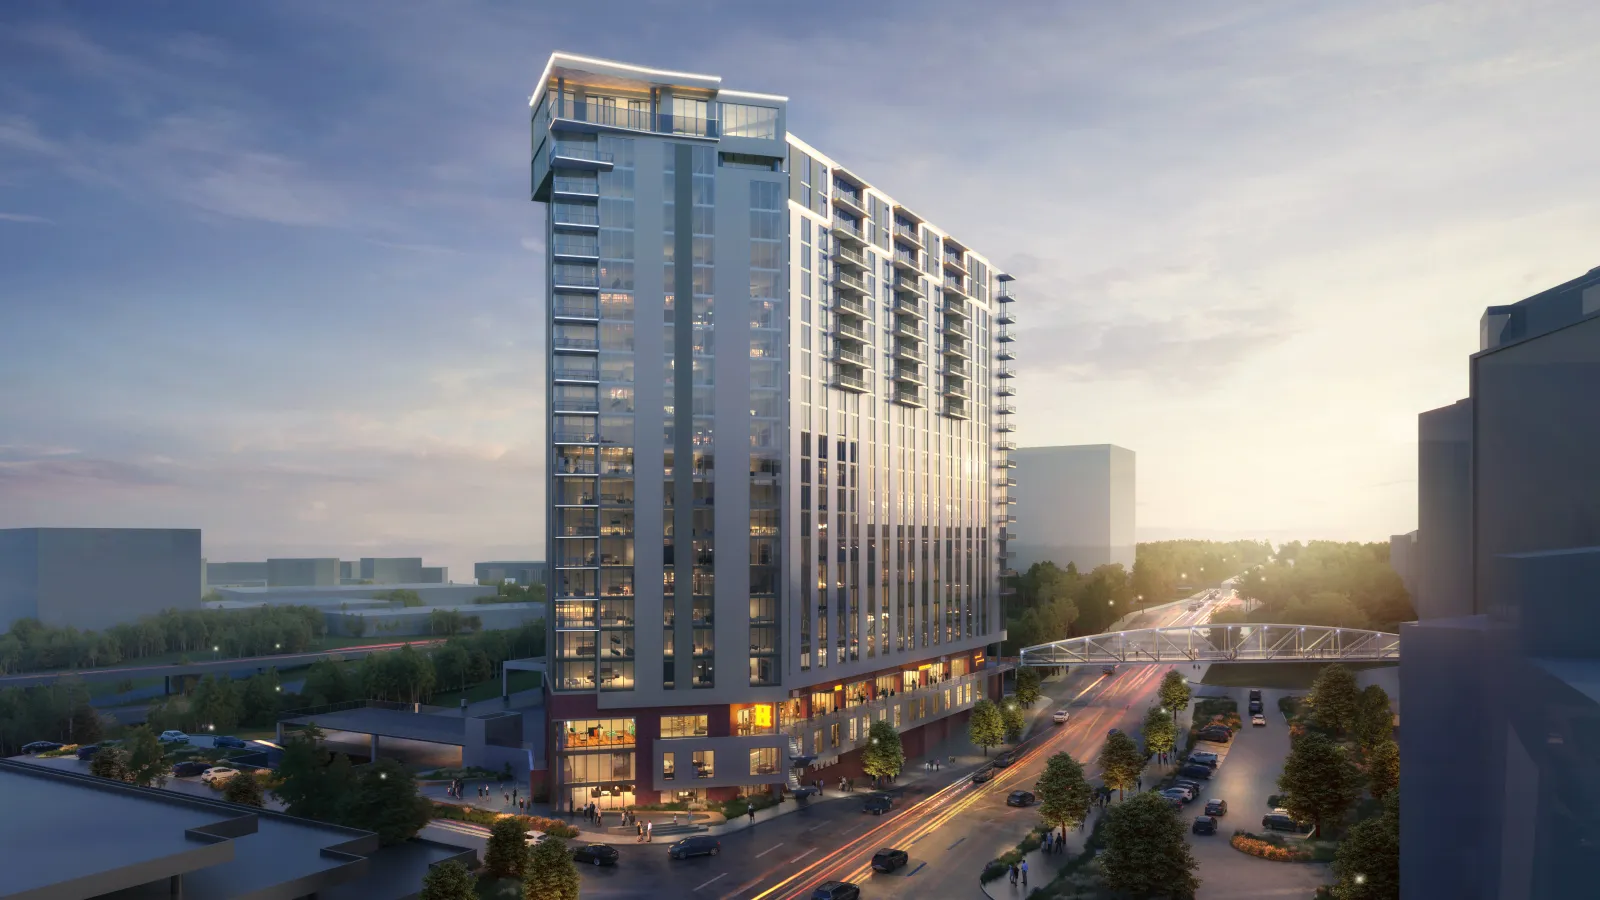 Official rendering of The Henry